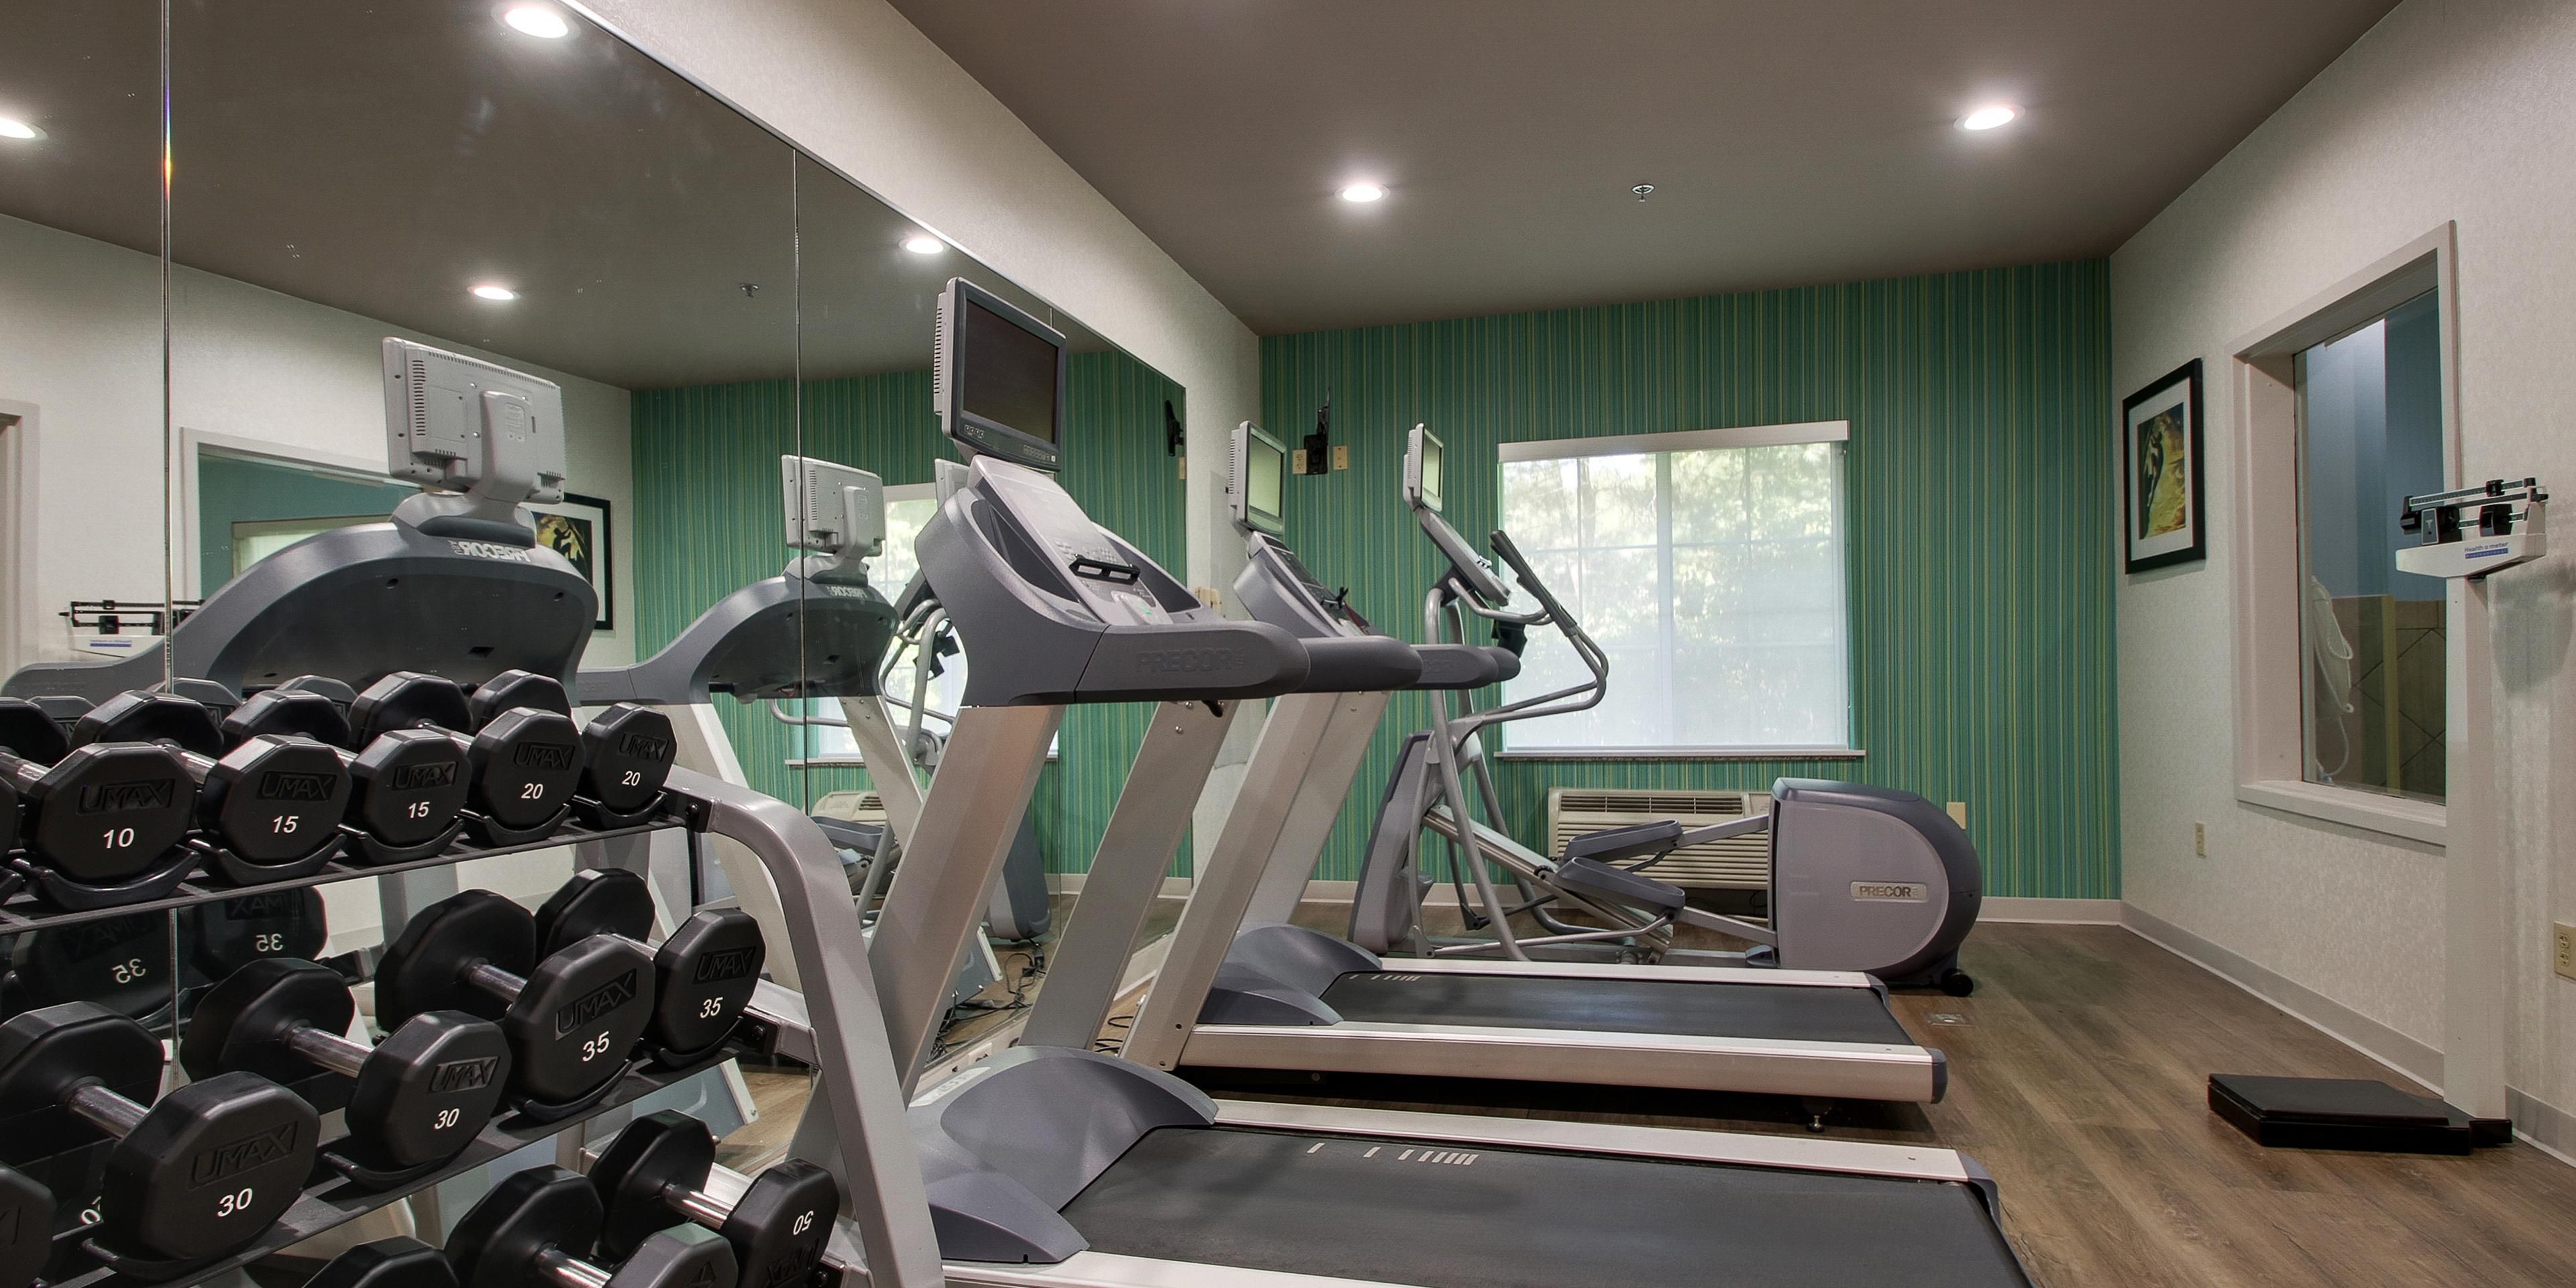 We offer a 24-hour fitness center with an elliptical, treadmill, and free weights to keep up your workout while you are away from home. 